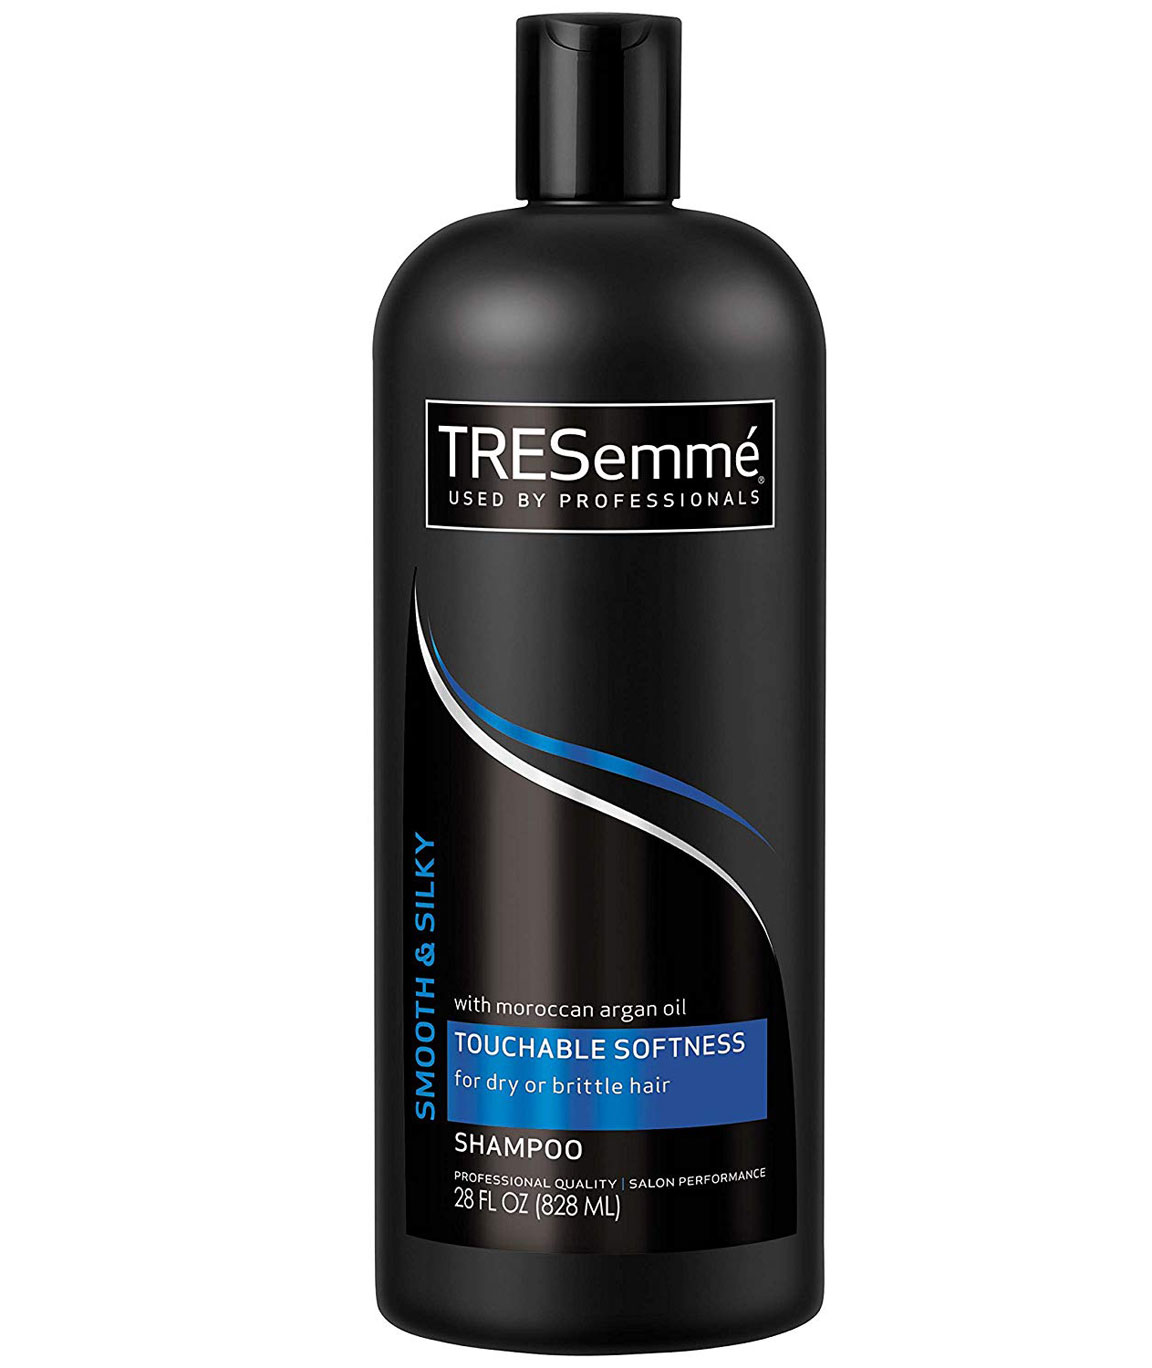 TRESemme Shampoo, Smooth and Silky 28 oz